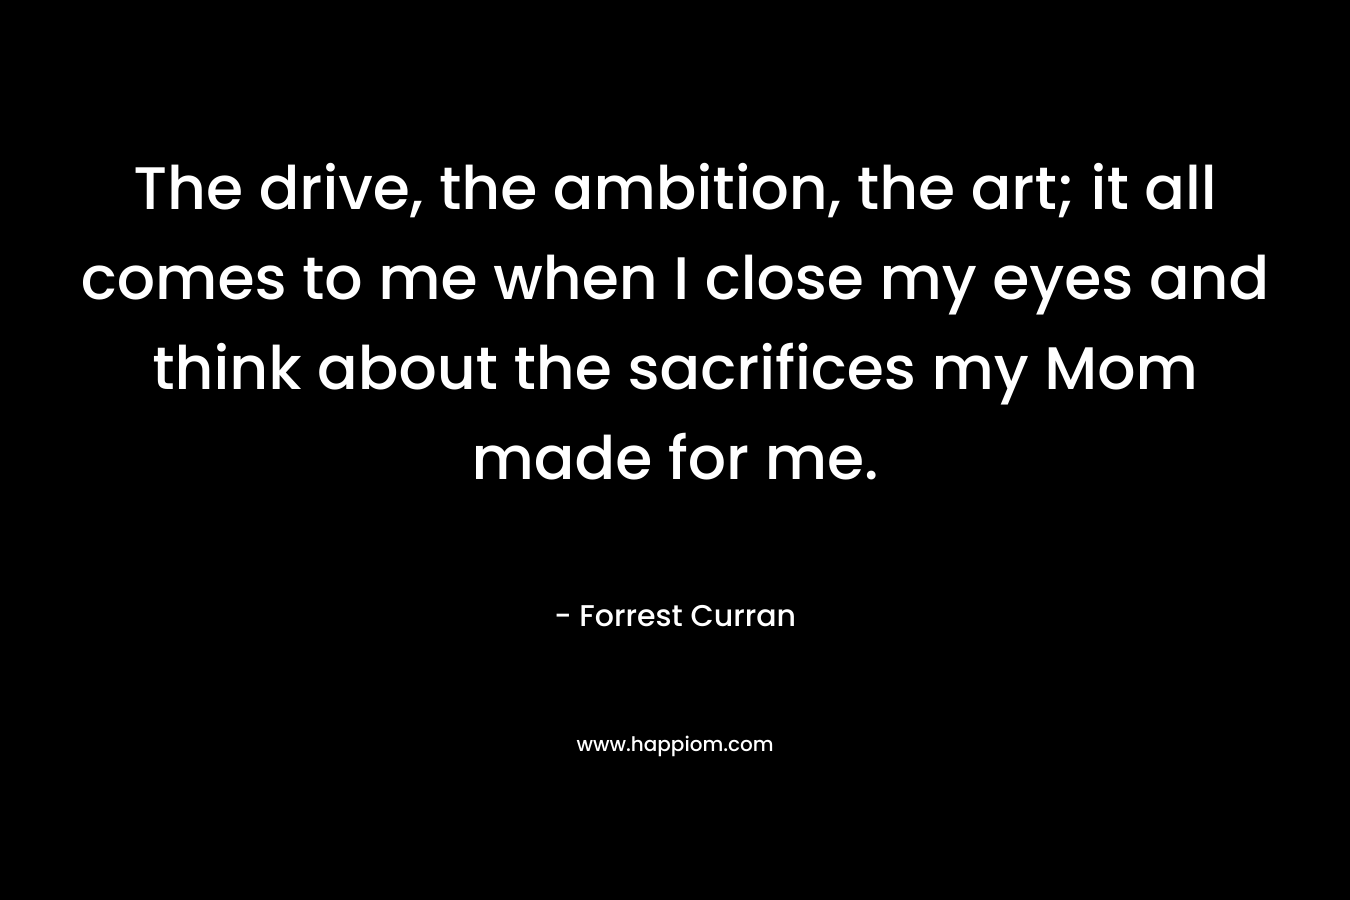 The drive, the ambition, the art; it all comes to me when I close my eyes and think about the sacrifices my Mom made for me. – Forrest Curran